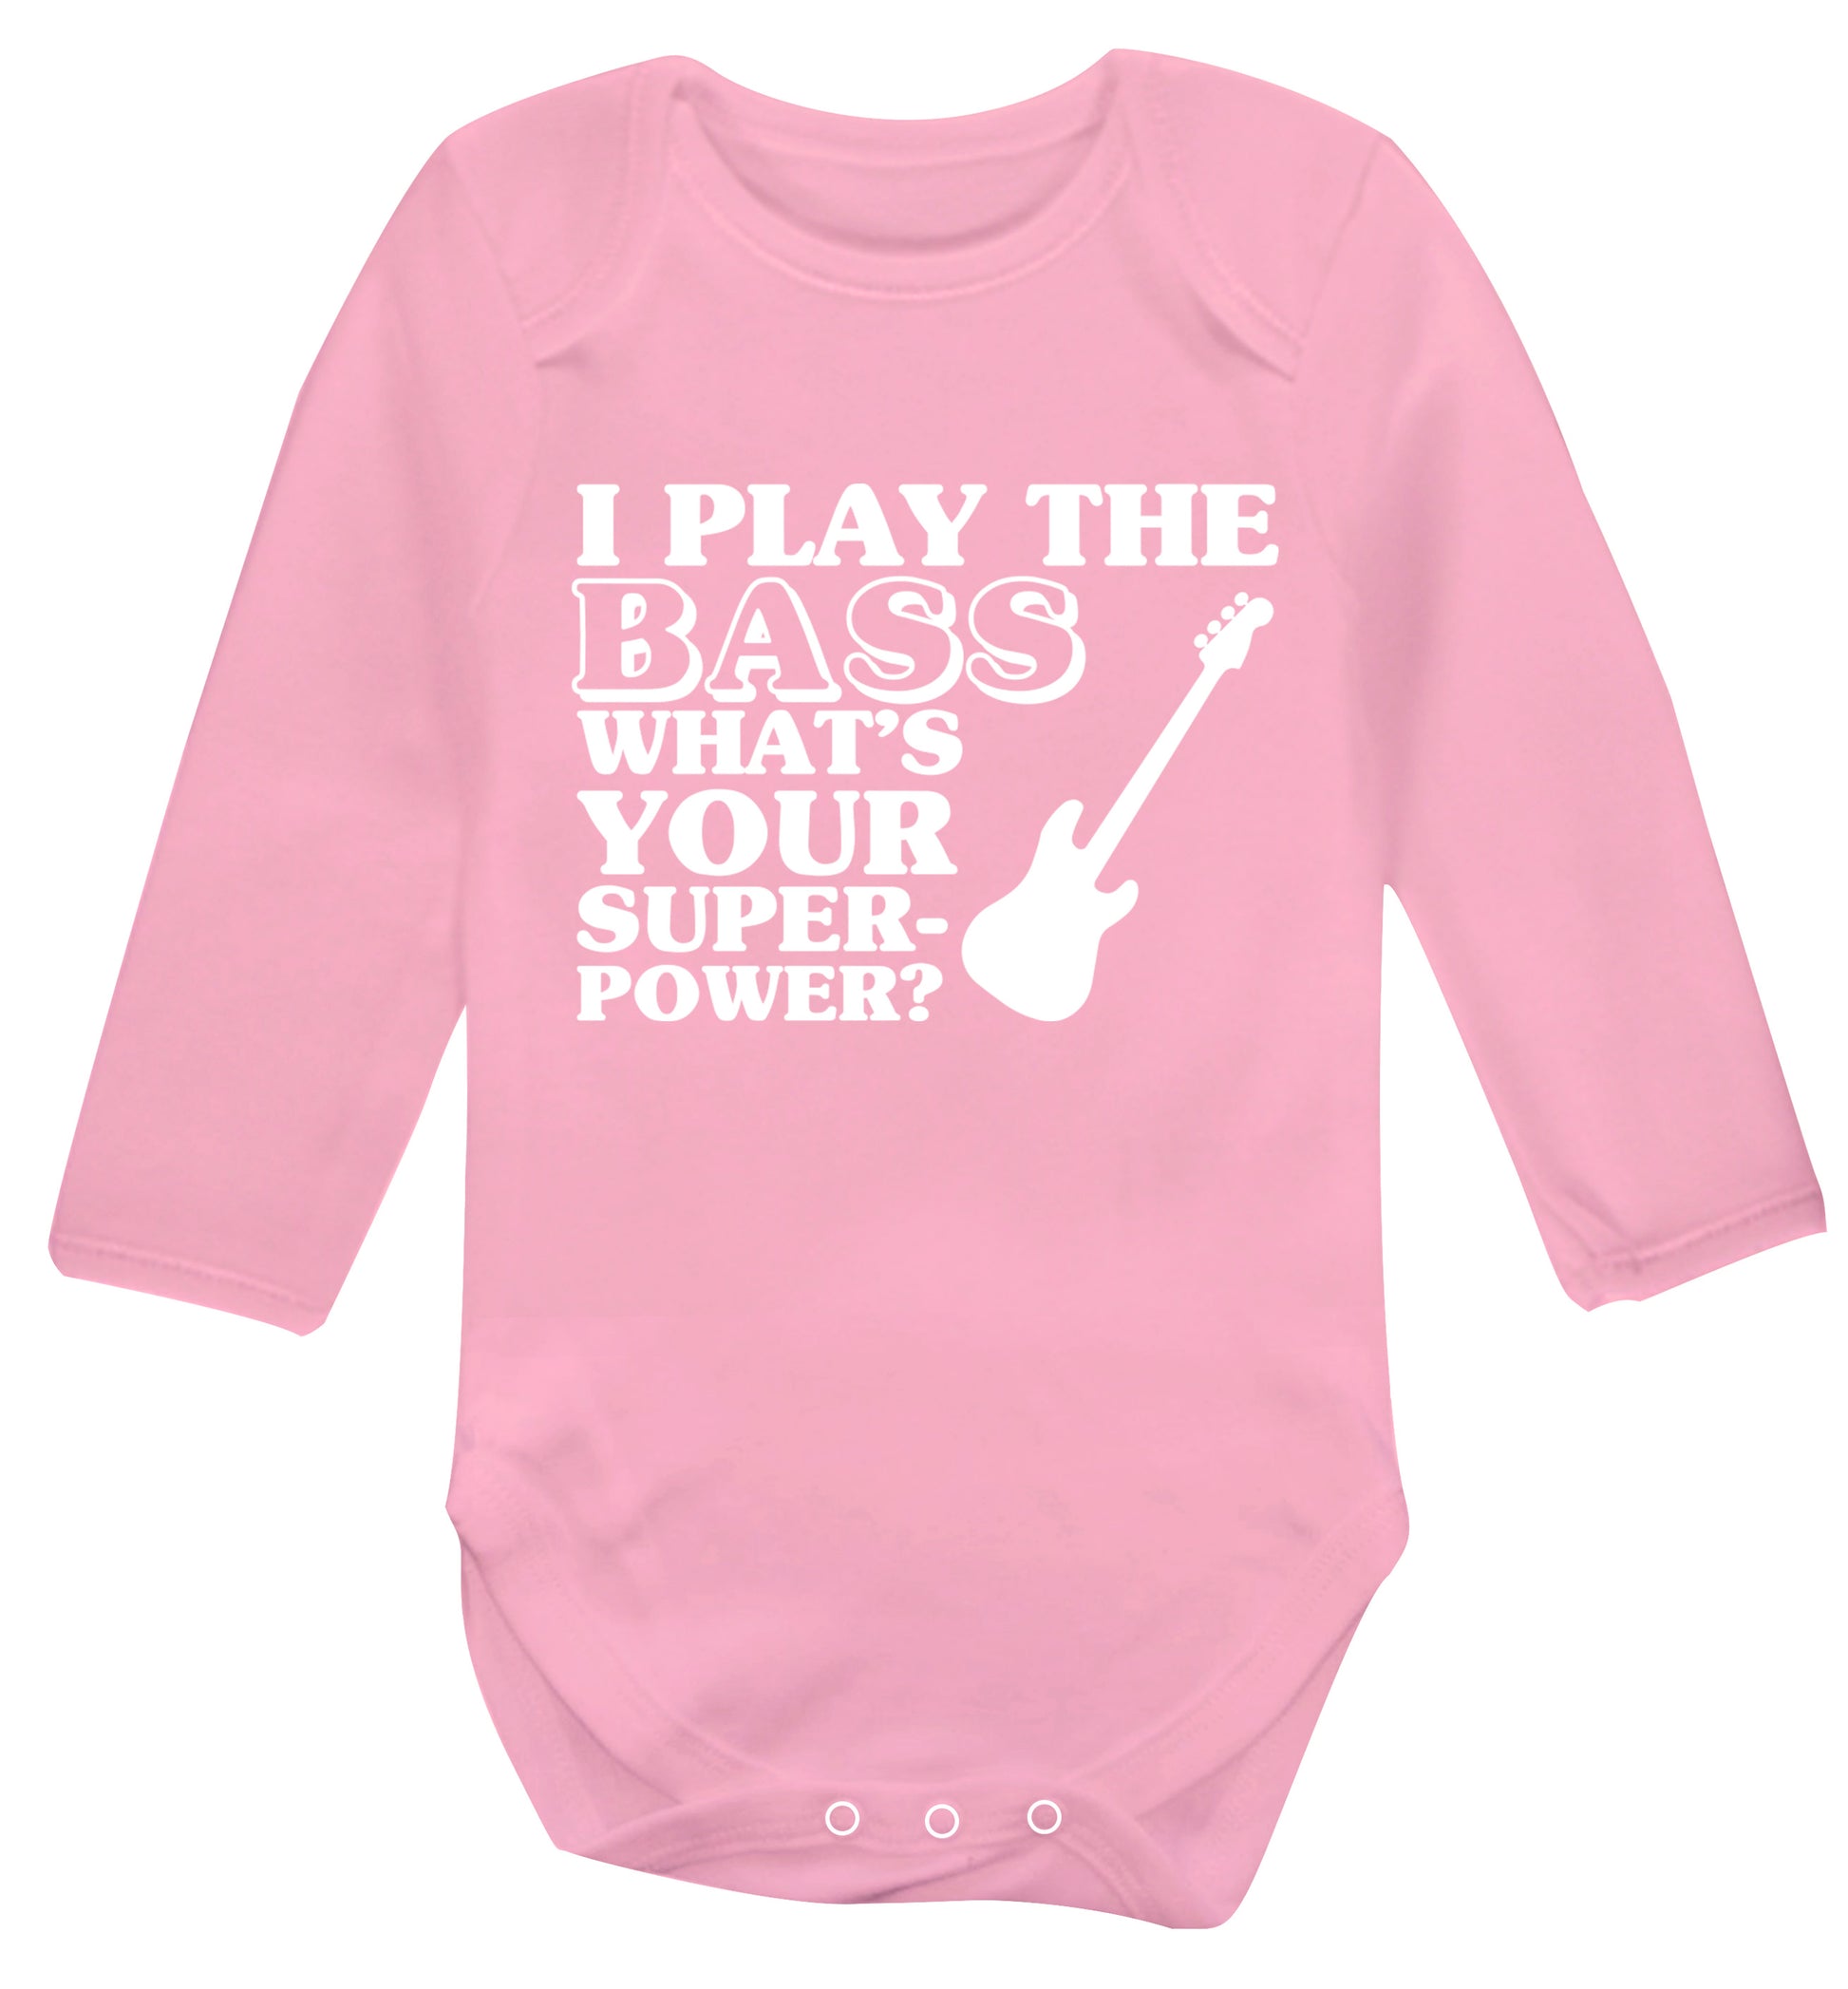 I play the bass what's your superpower? Baby Vest long sleeved pale pink 6-12 months